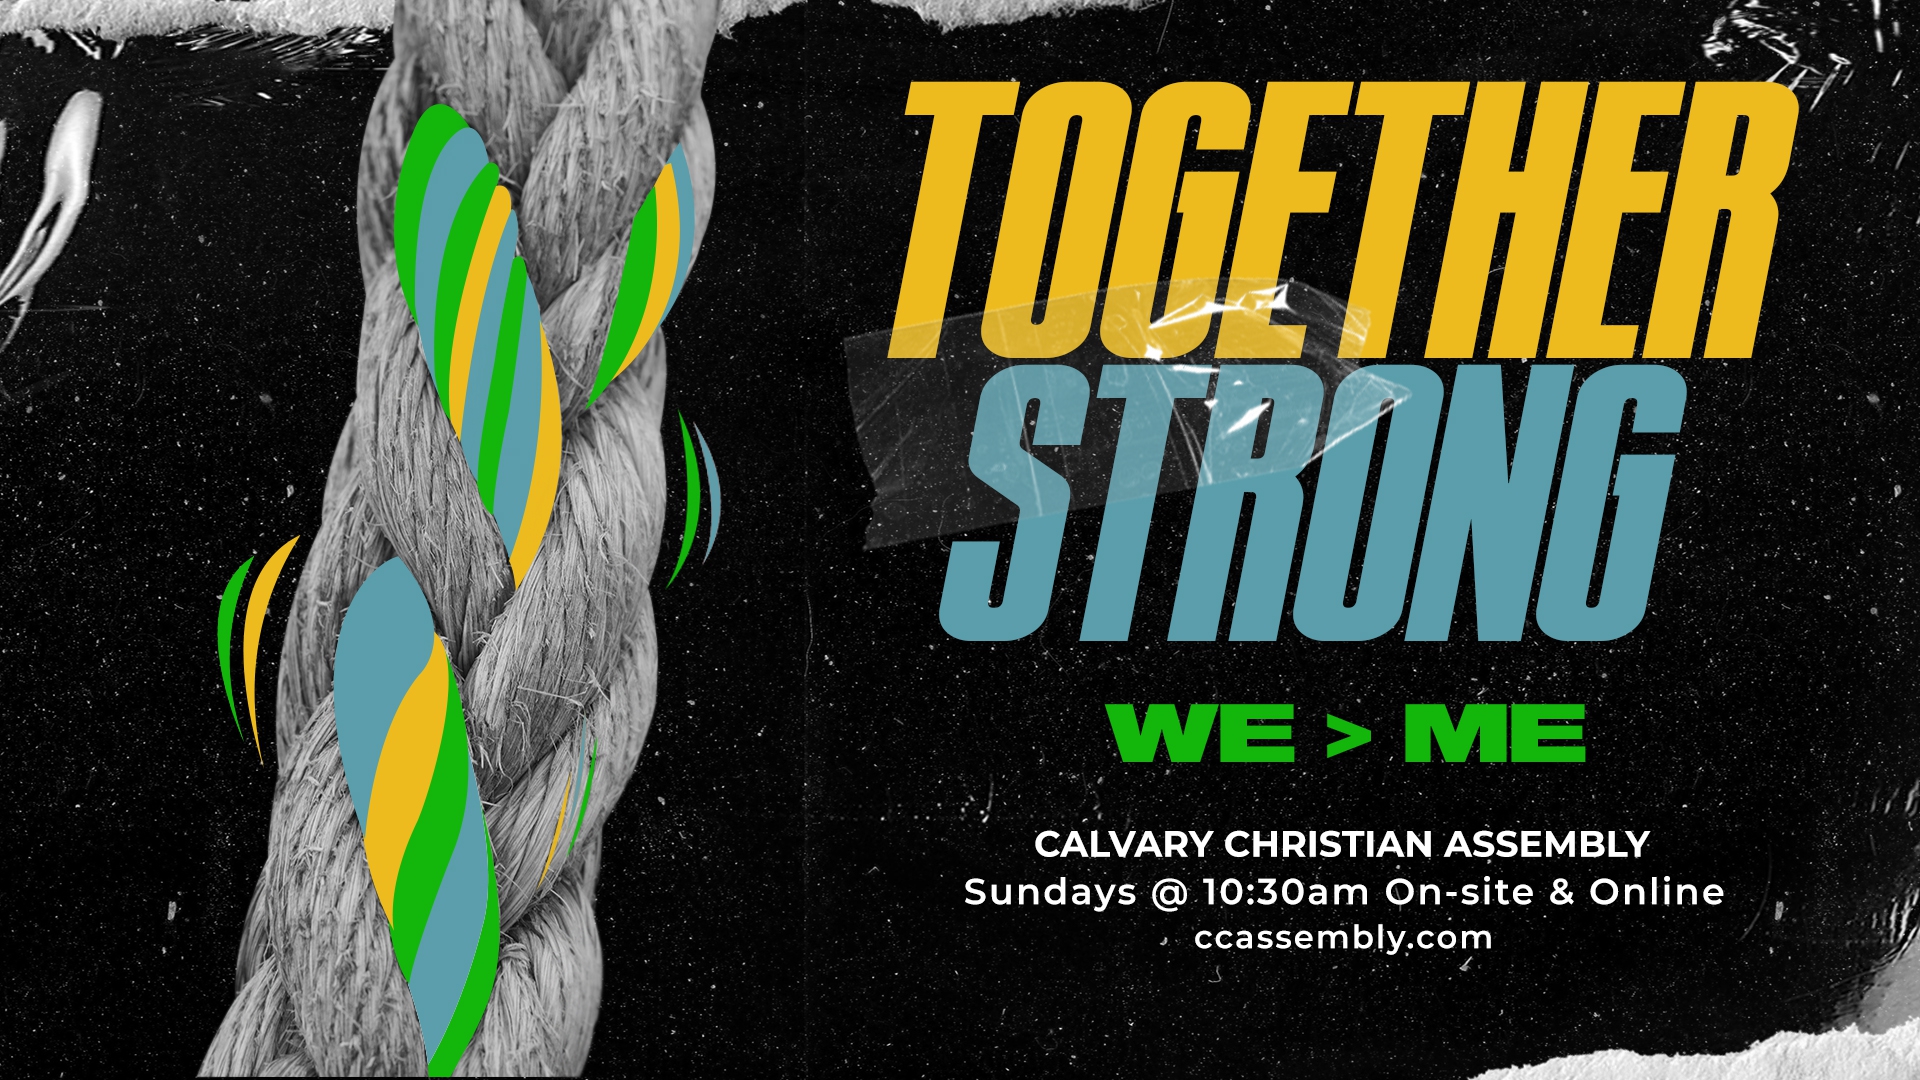 Together Strong:We > Me - How To Come Together and Deal with the Disputes That Otherwise Tear Us Apart